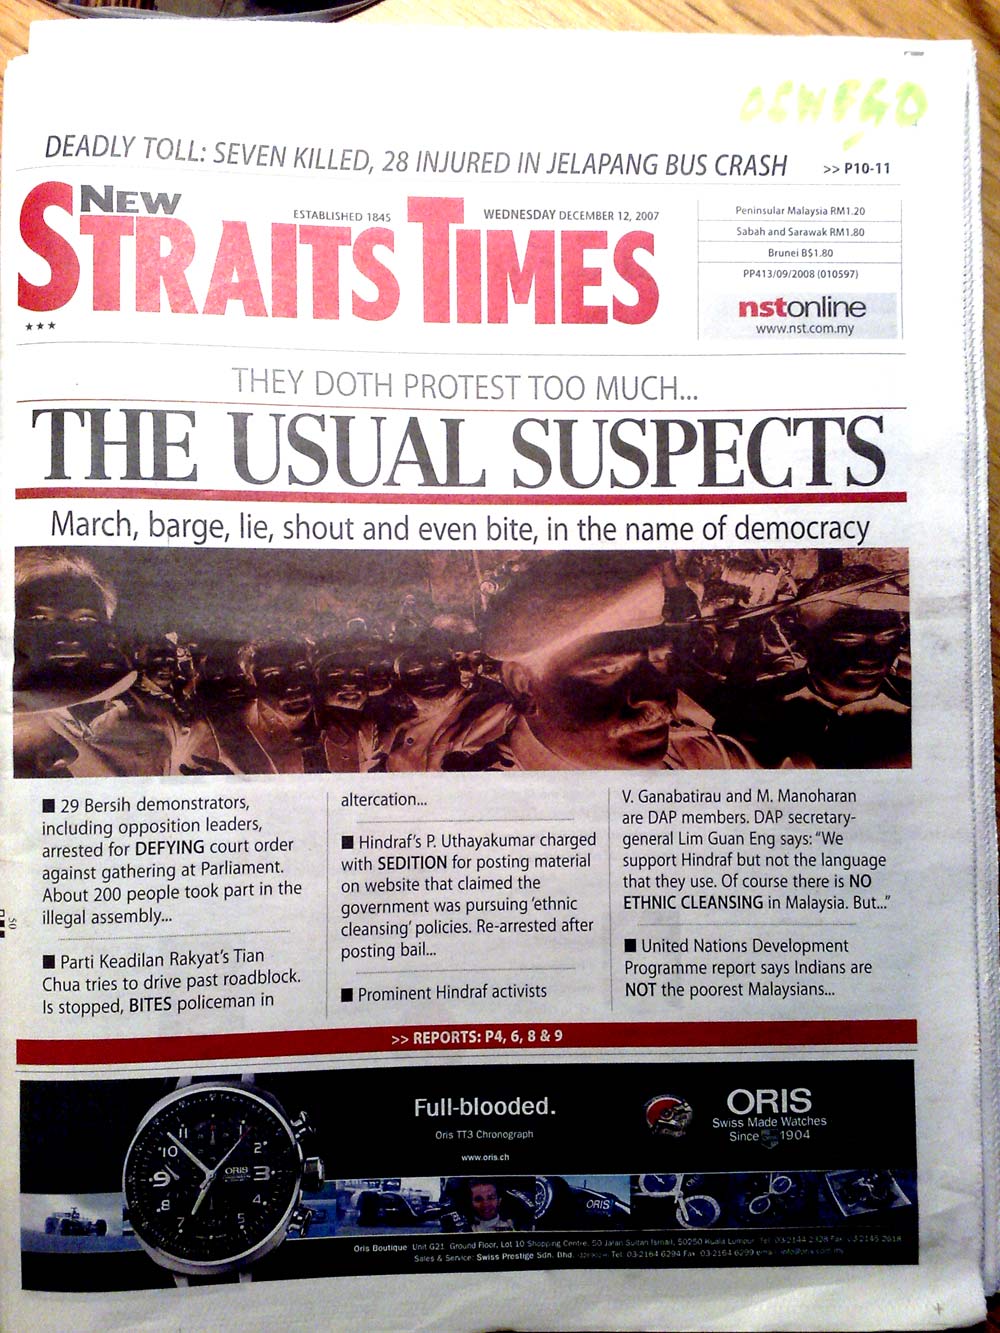 The new straits times